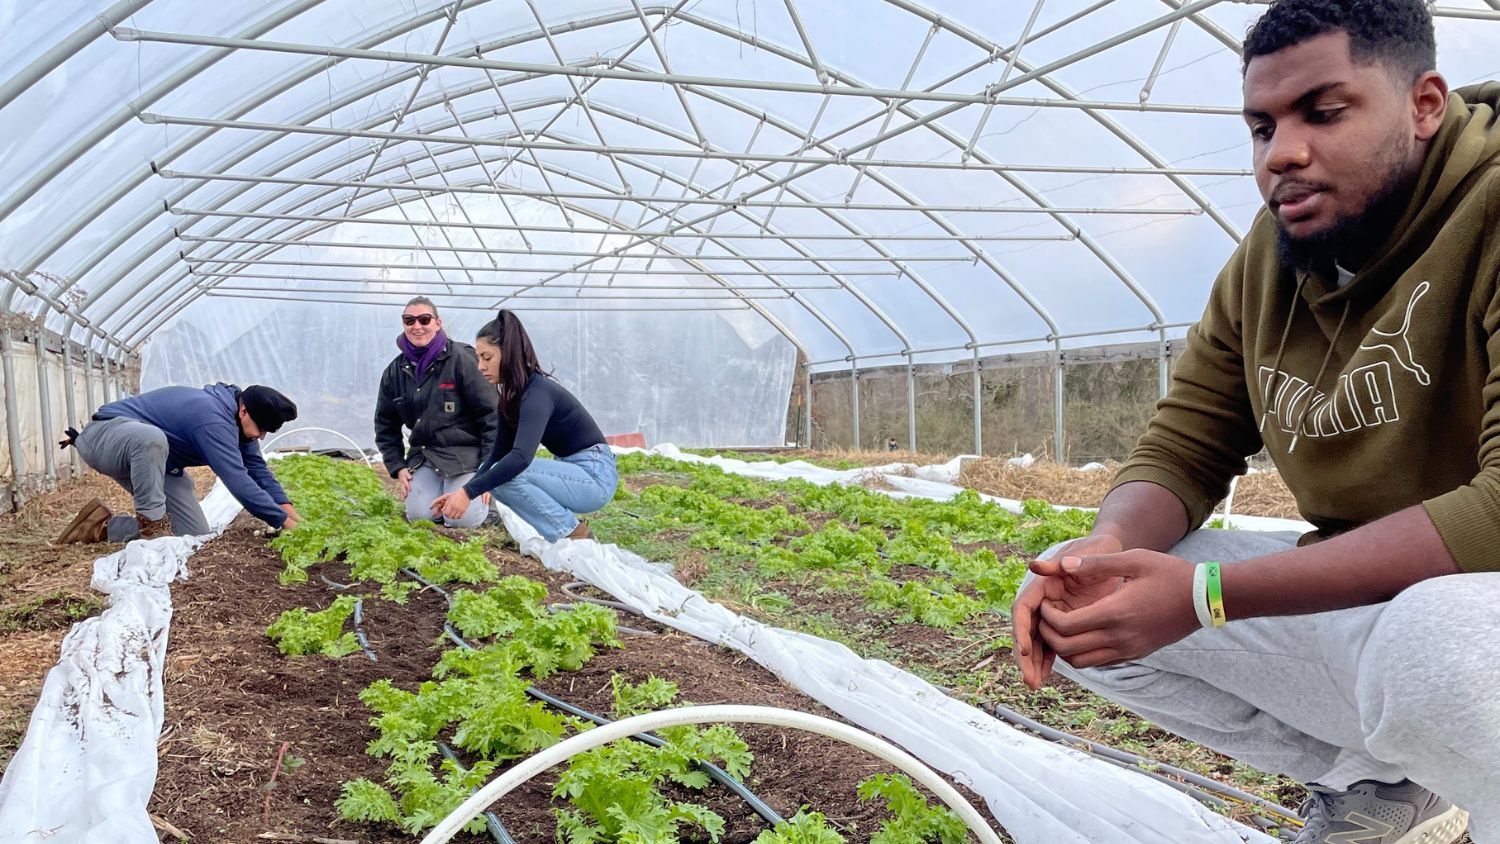 NC State's Jaleel Hewitt works in a high tunnel at the NC State agroecology education farm.